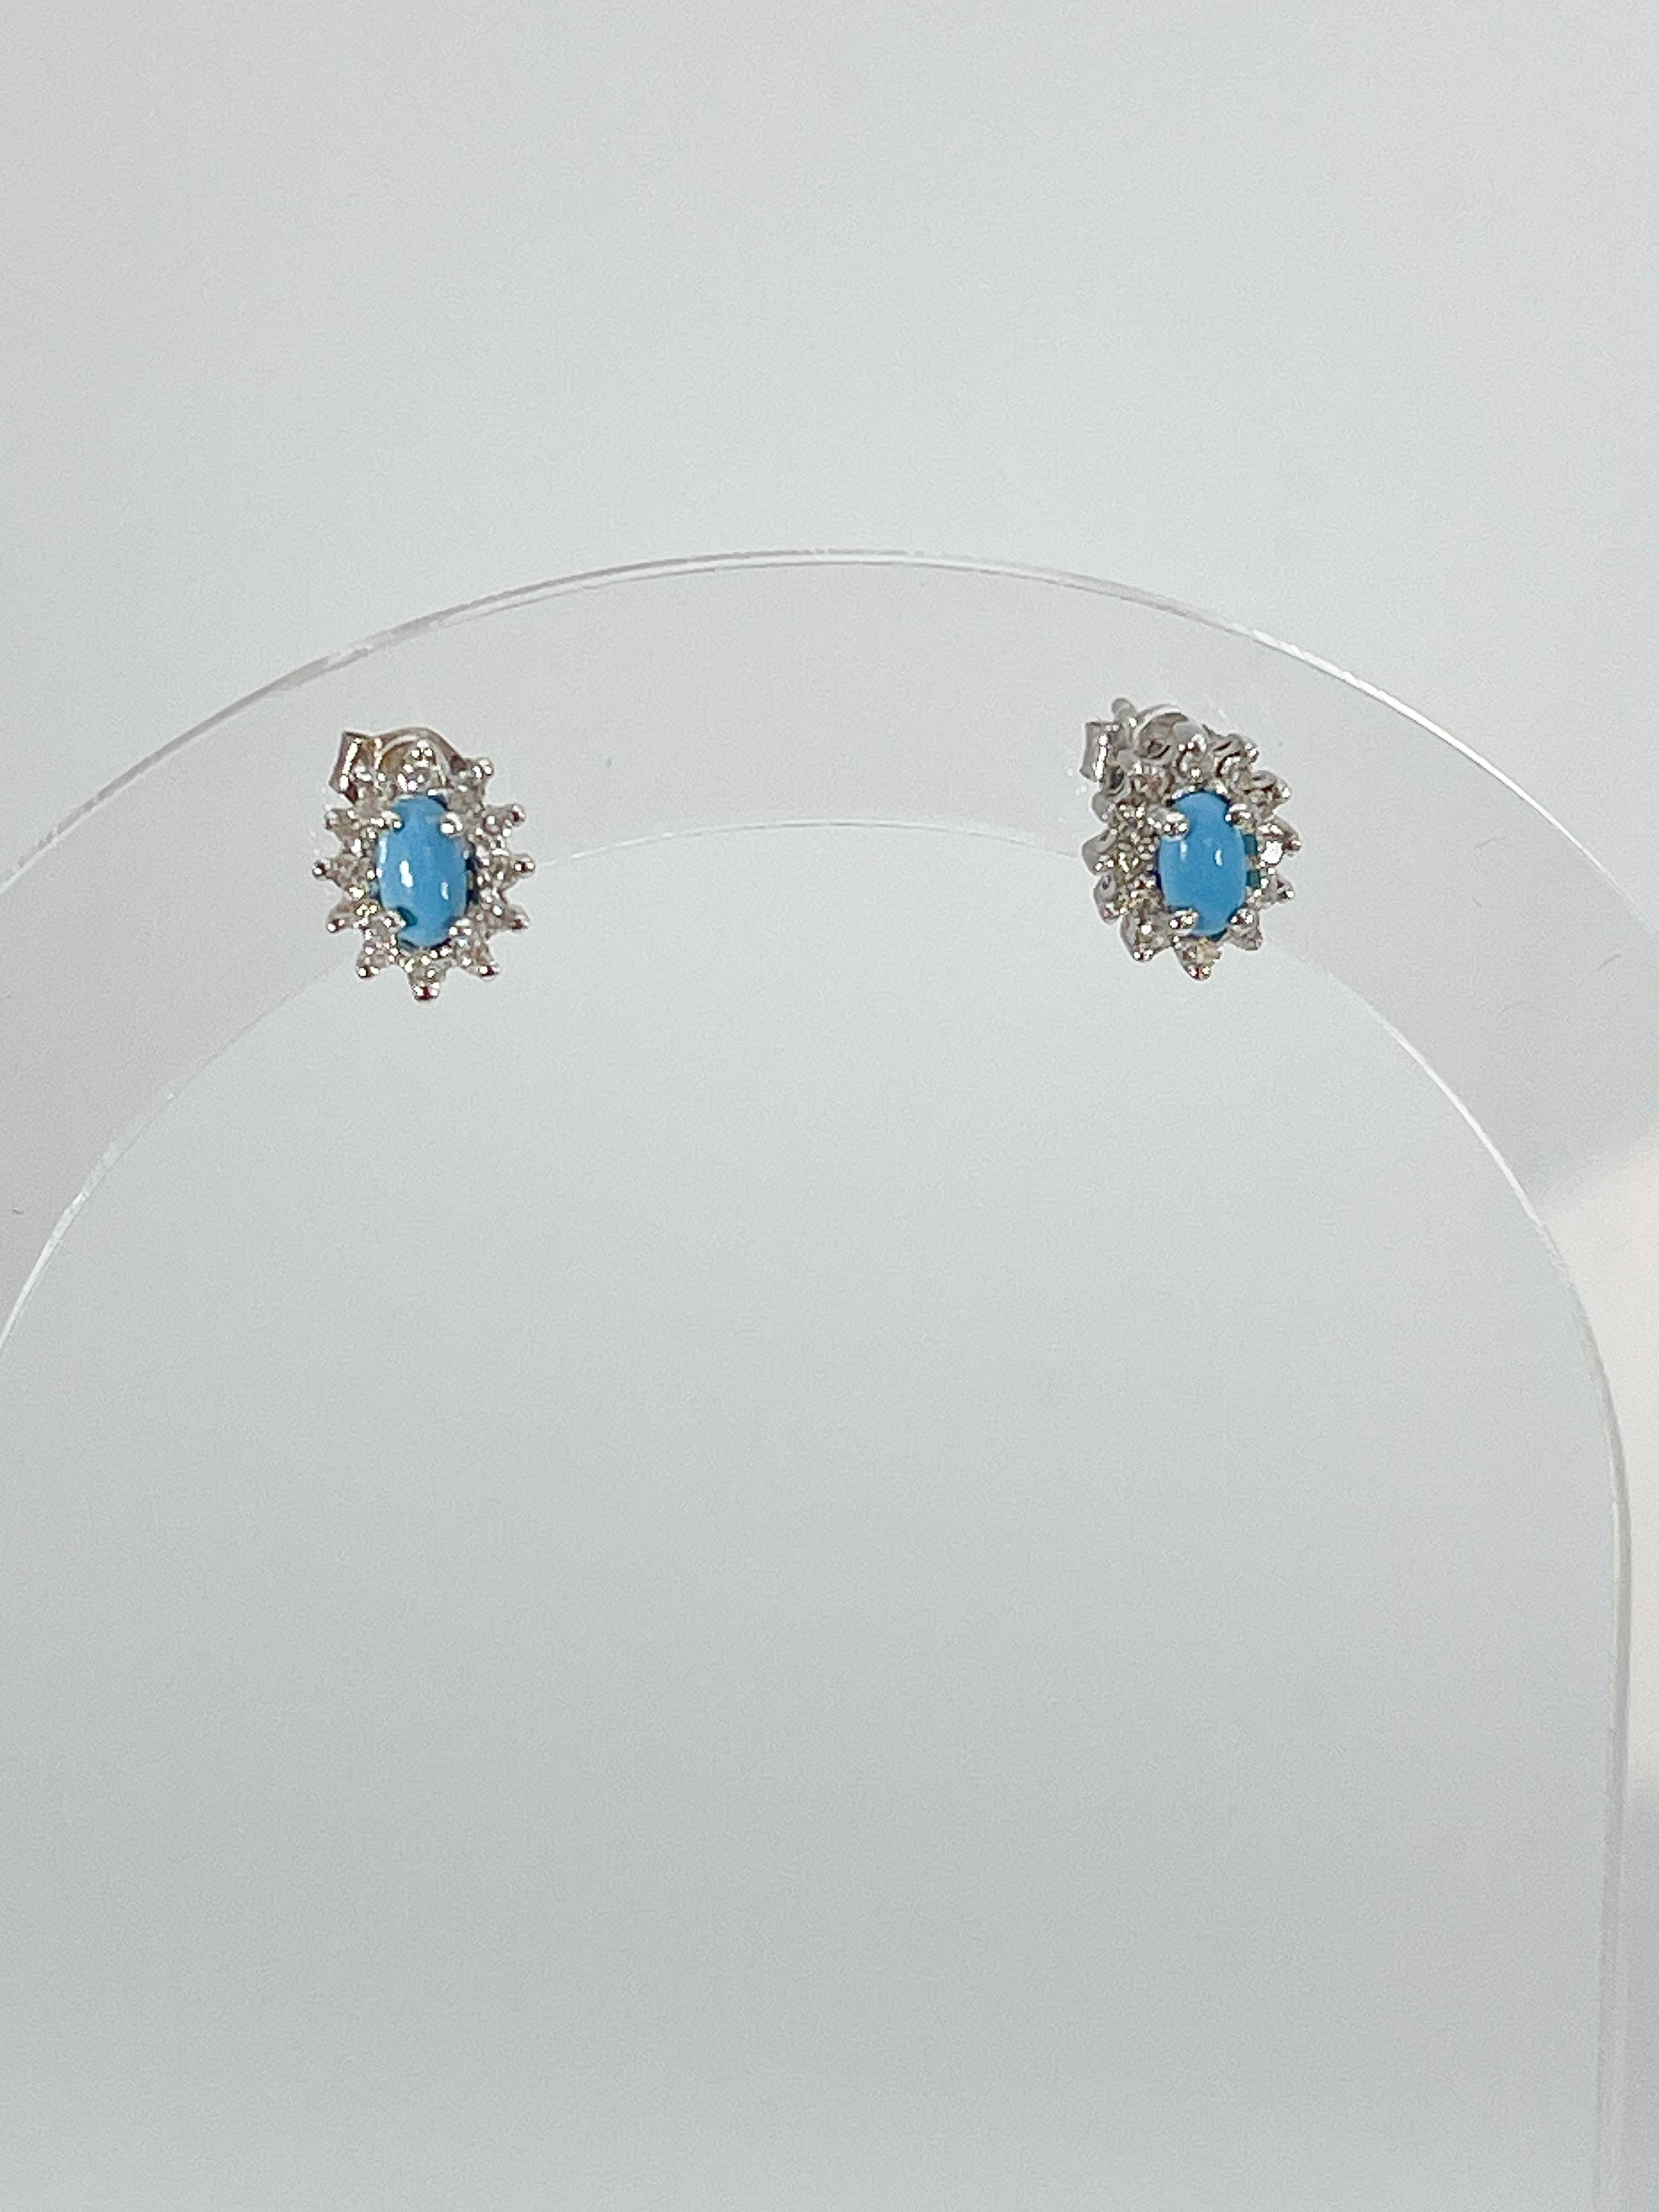 14k white gold oval turquoise and diamond stud earrings. The diamonds are all round, measurements of these earrings are 8.8 x 7.3 mm, and have a total weight of 1.7 grams.